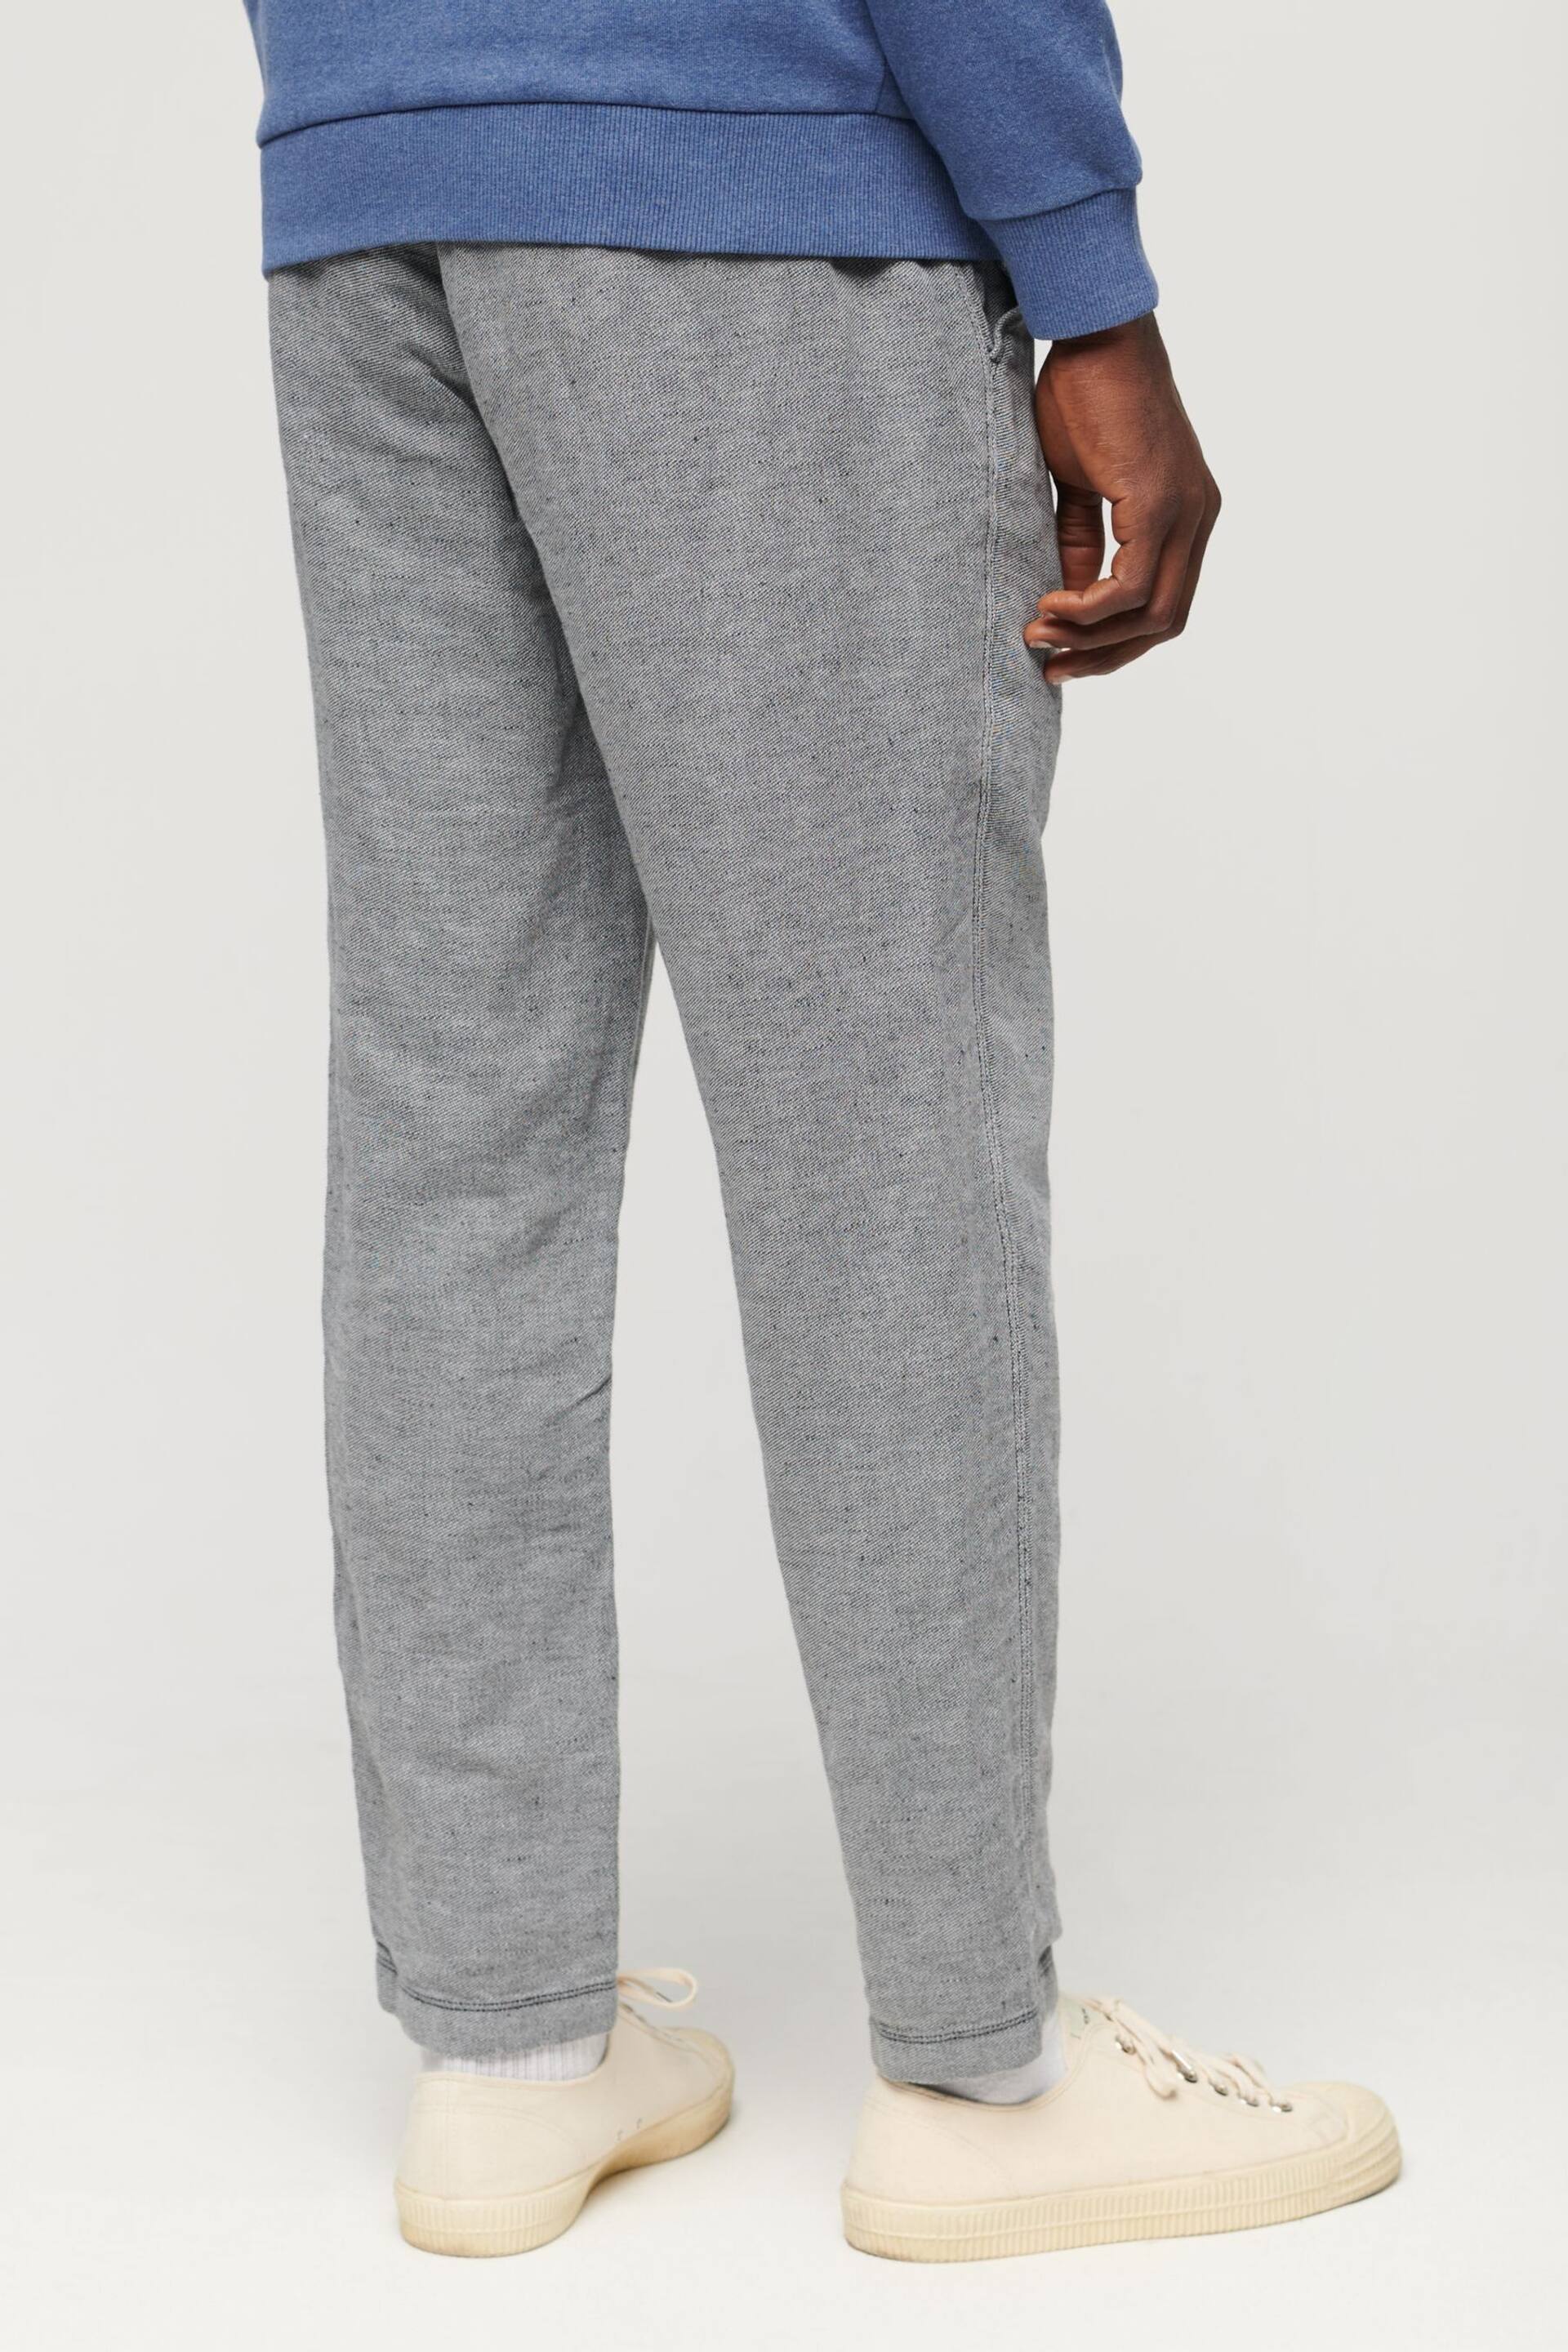 Superdry Grey Drawstring Linen Trousers - Image 2 of 5